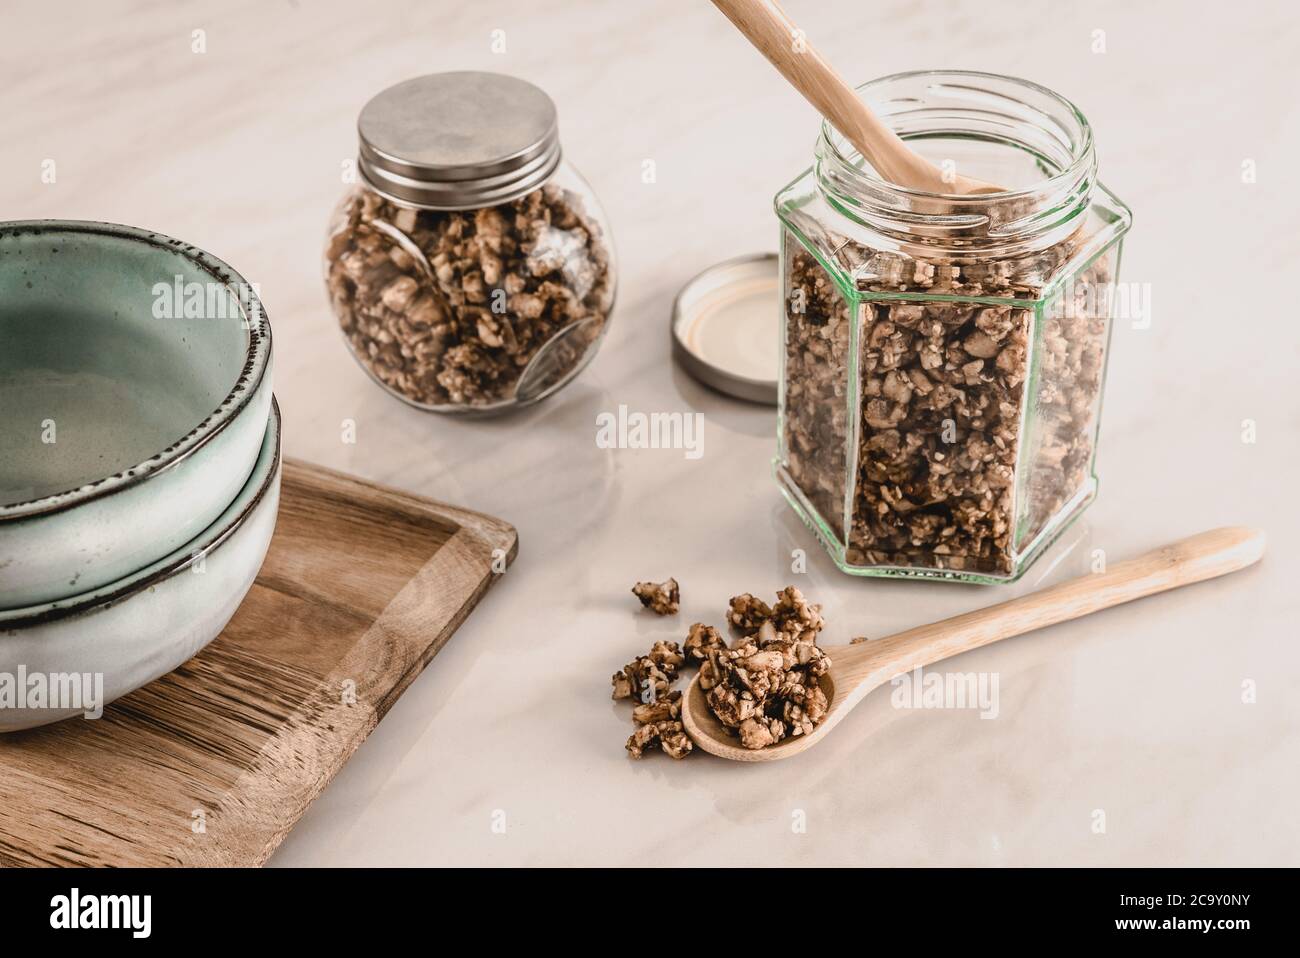 Homemade healthy and nutritious keto diet breakfast granola in glass jars with wooden spoons and blue ceramic bowls on marble kitchen table Stock Photo